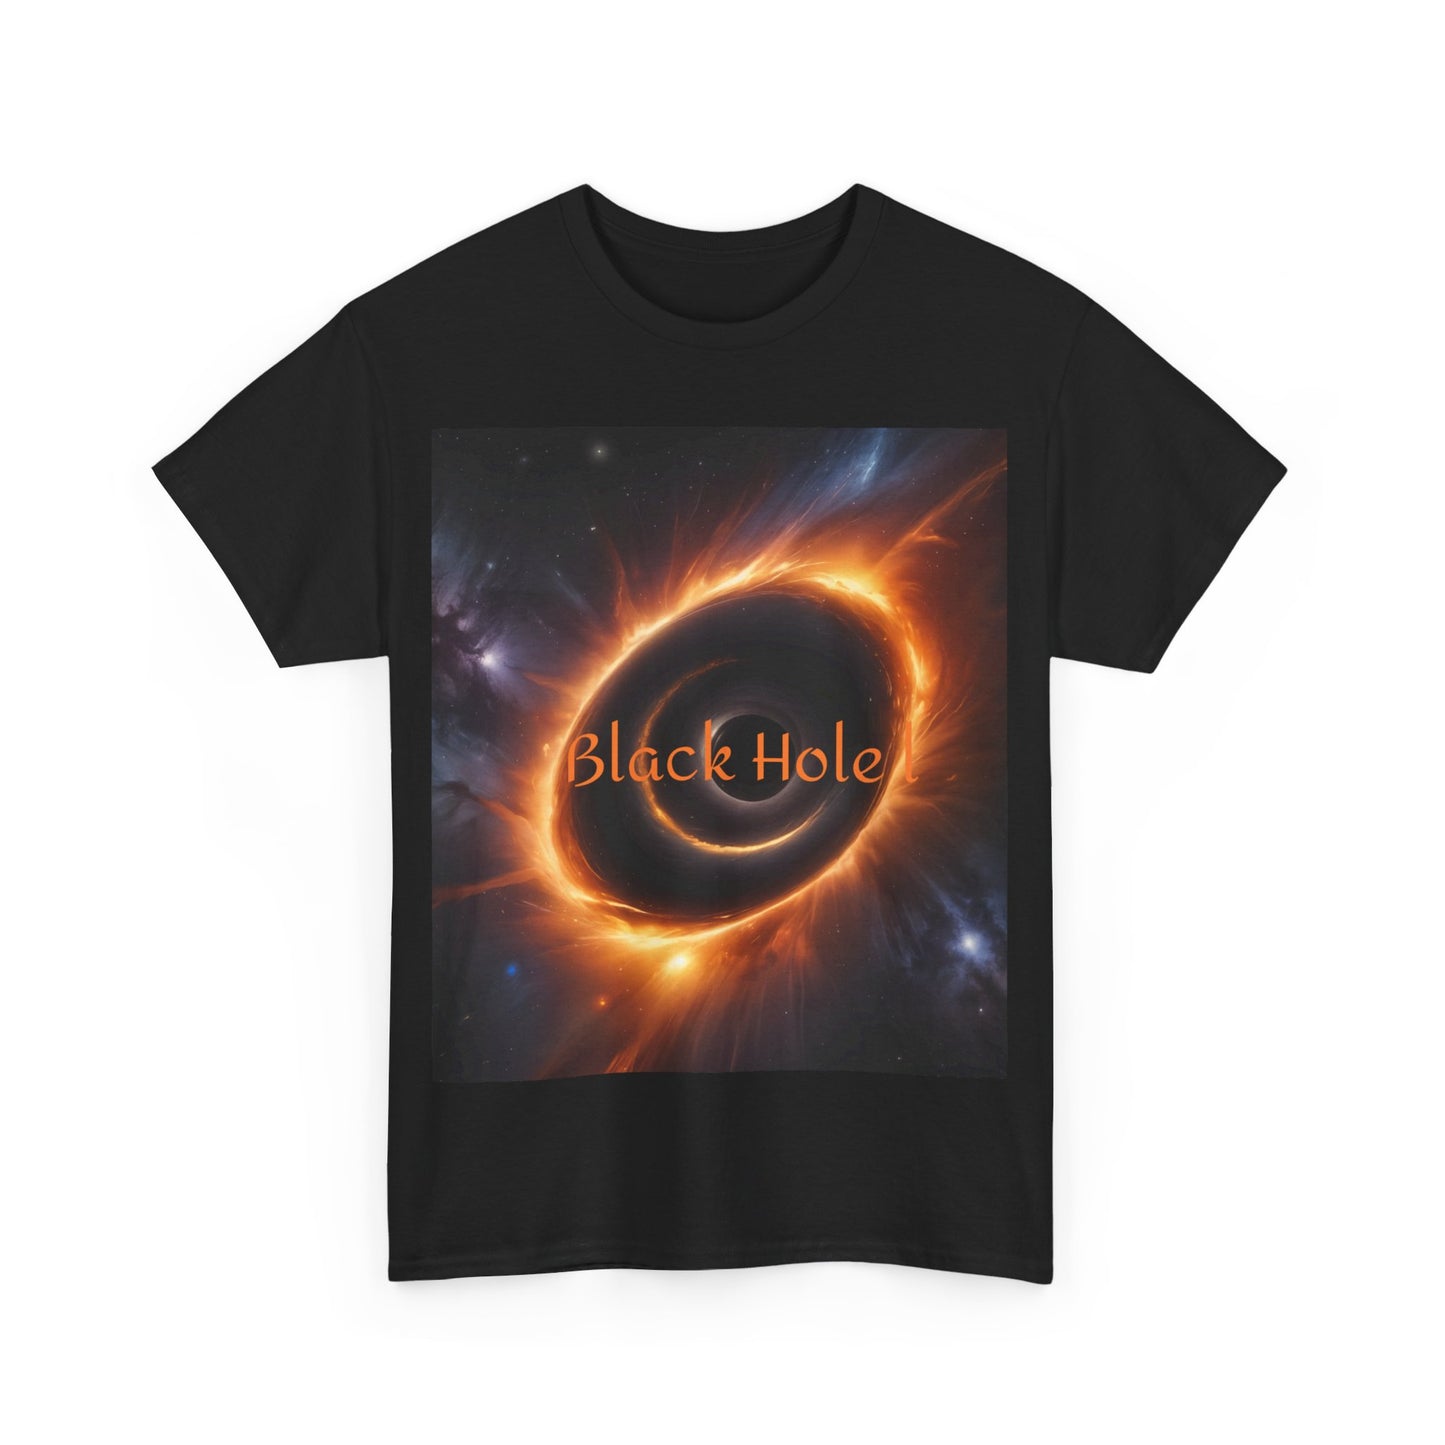 Black Hole Tee with Poem - Unisex Heavy Cotton Tee in Black and other Dark Colors